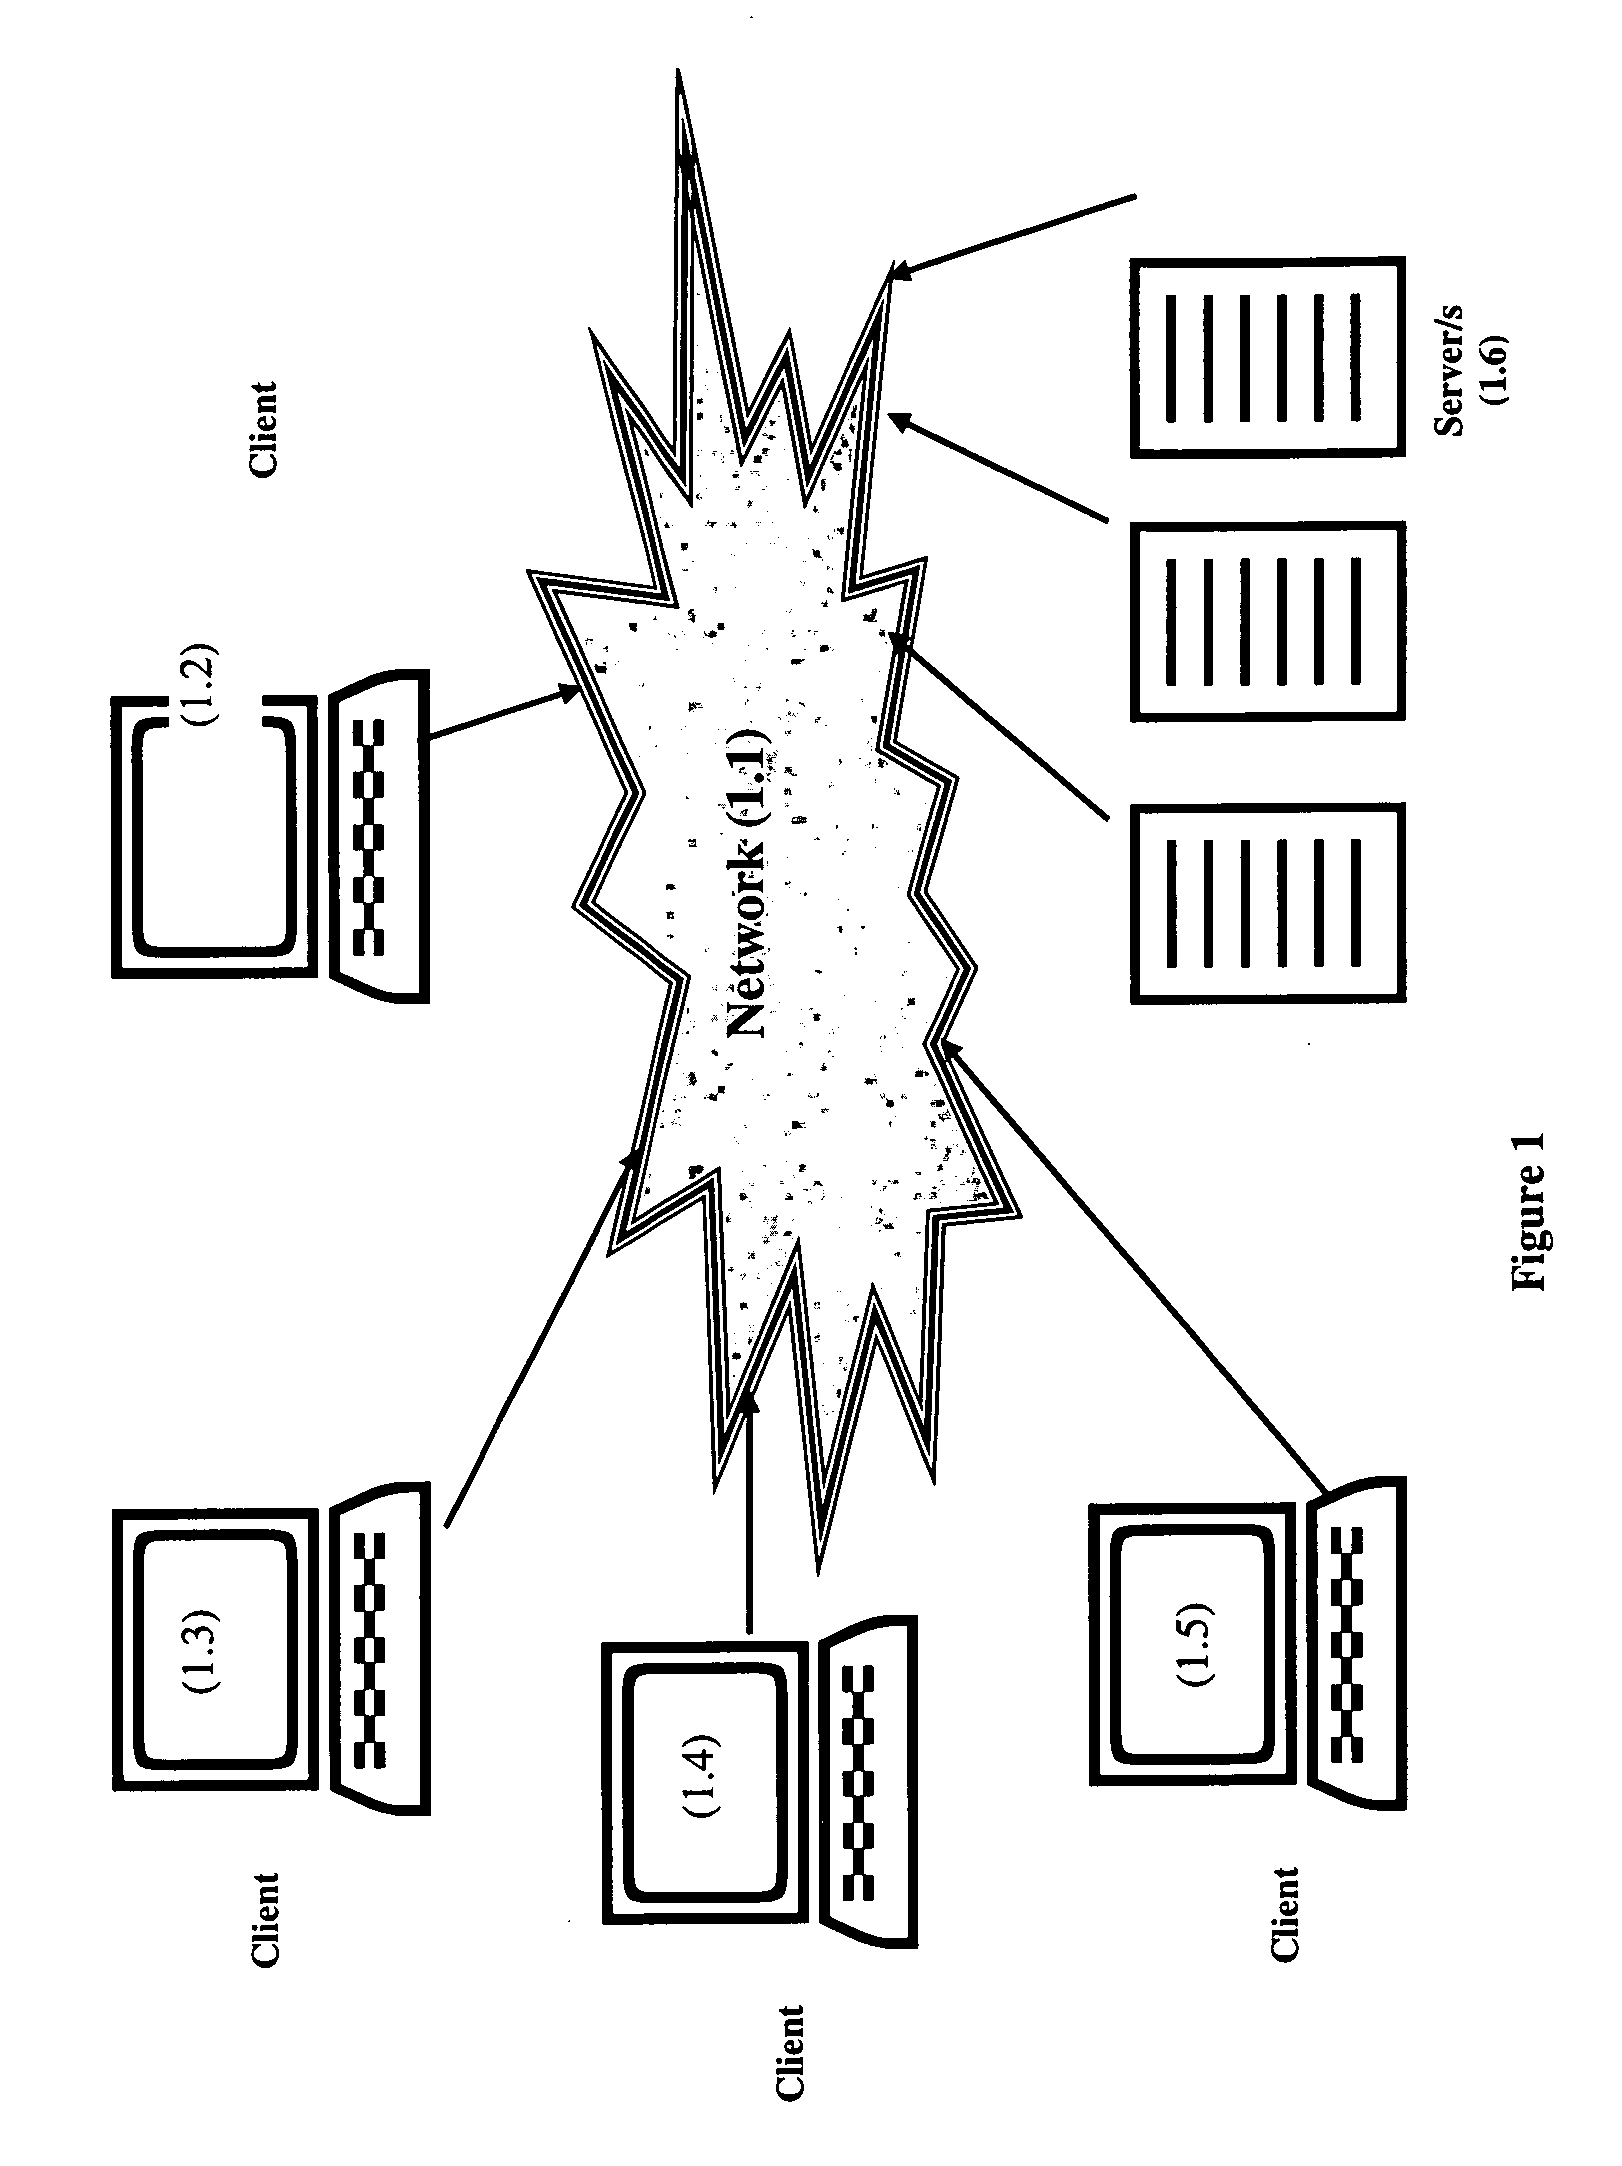 Method and System for Conducting Online Marketing Research in a Controlled Manner